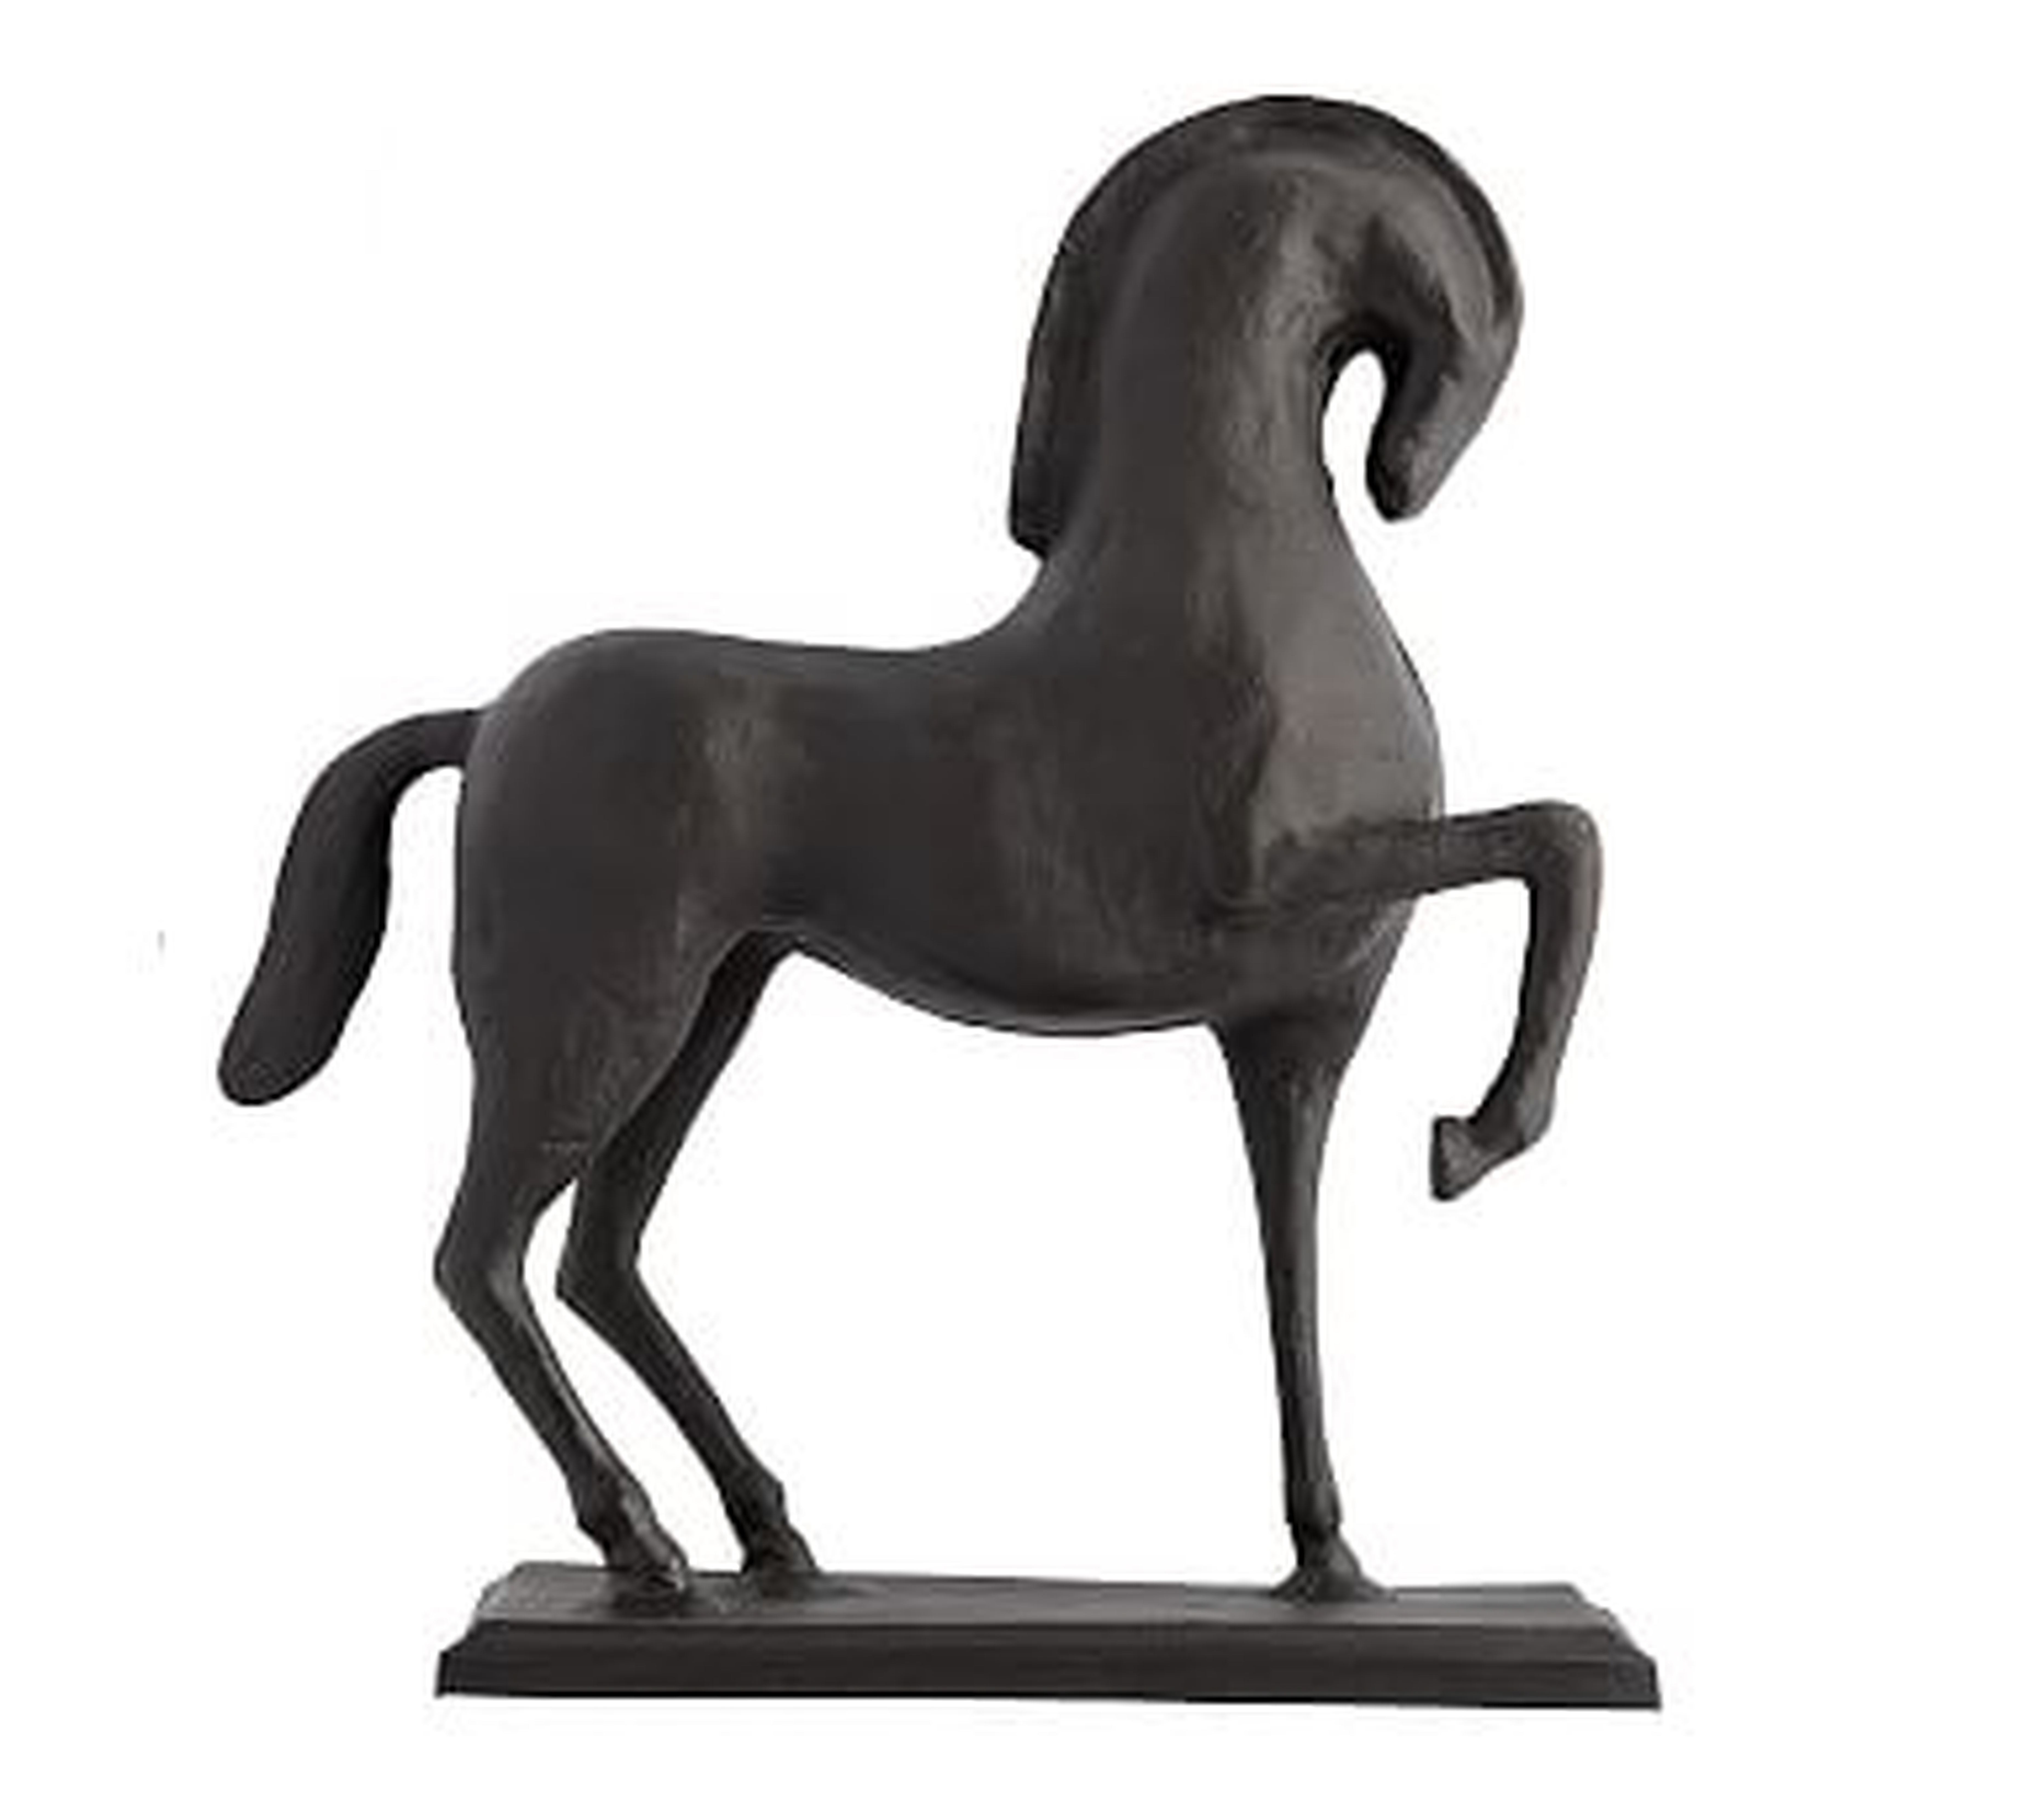 Prancing Horse Object, Bronze, One Size - Pottery Barn